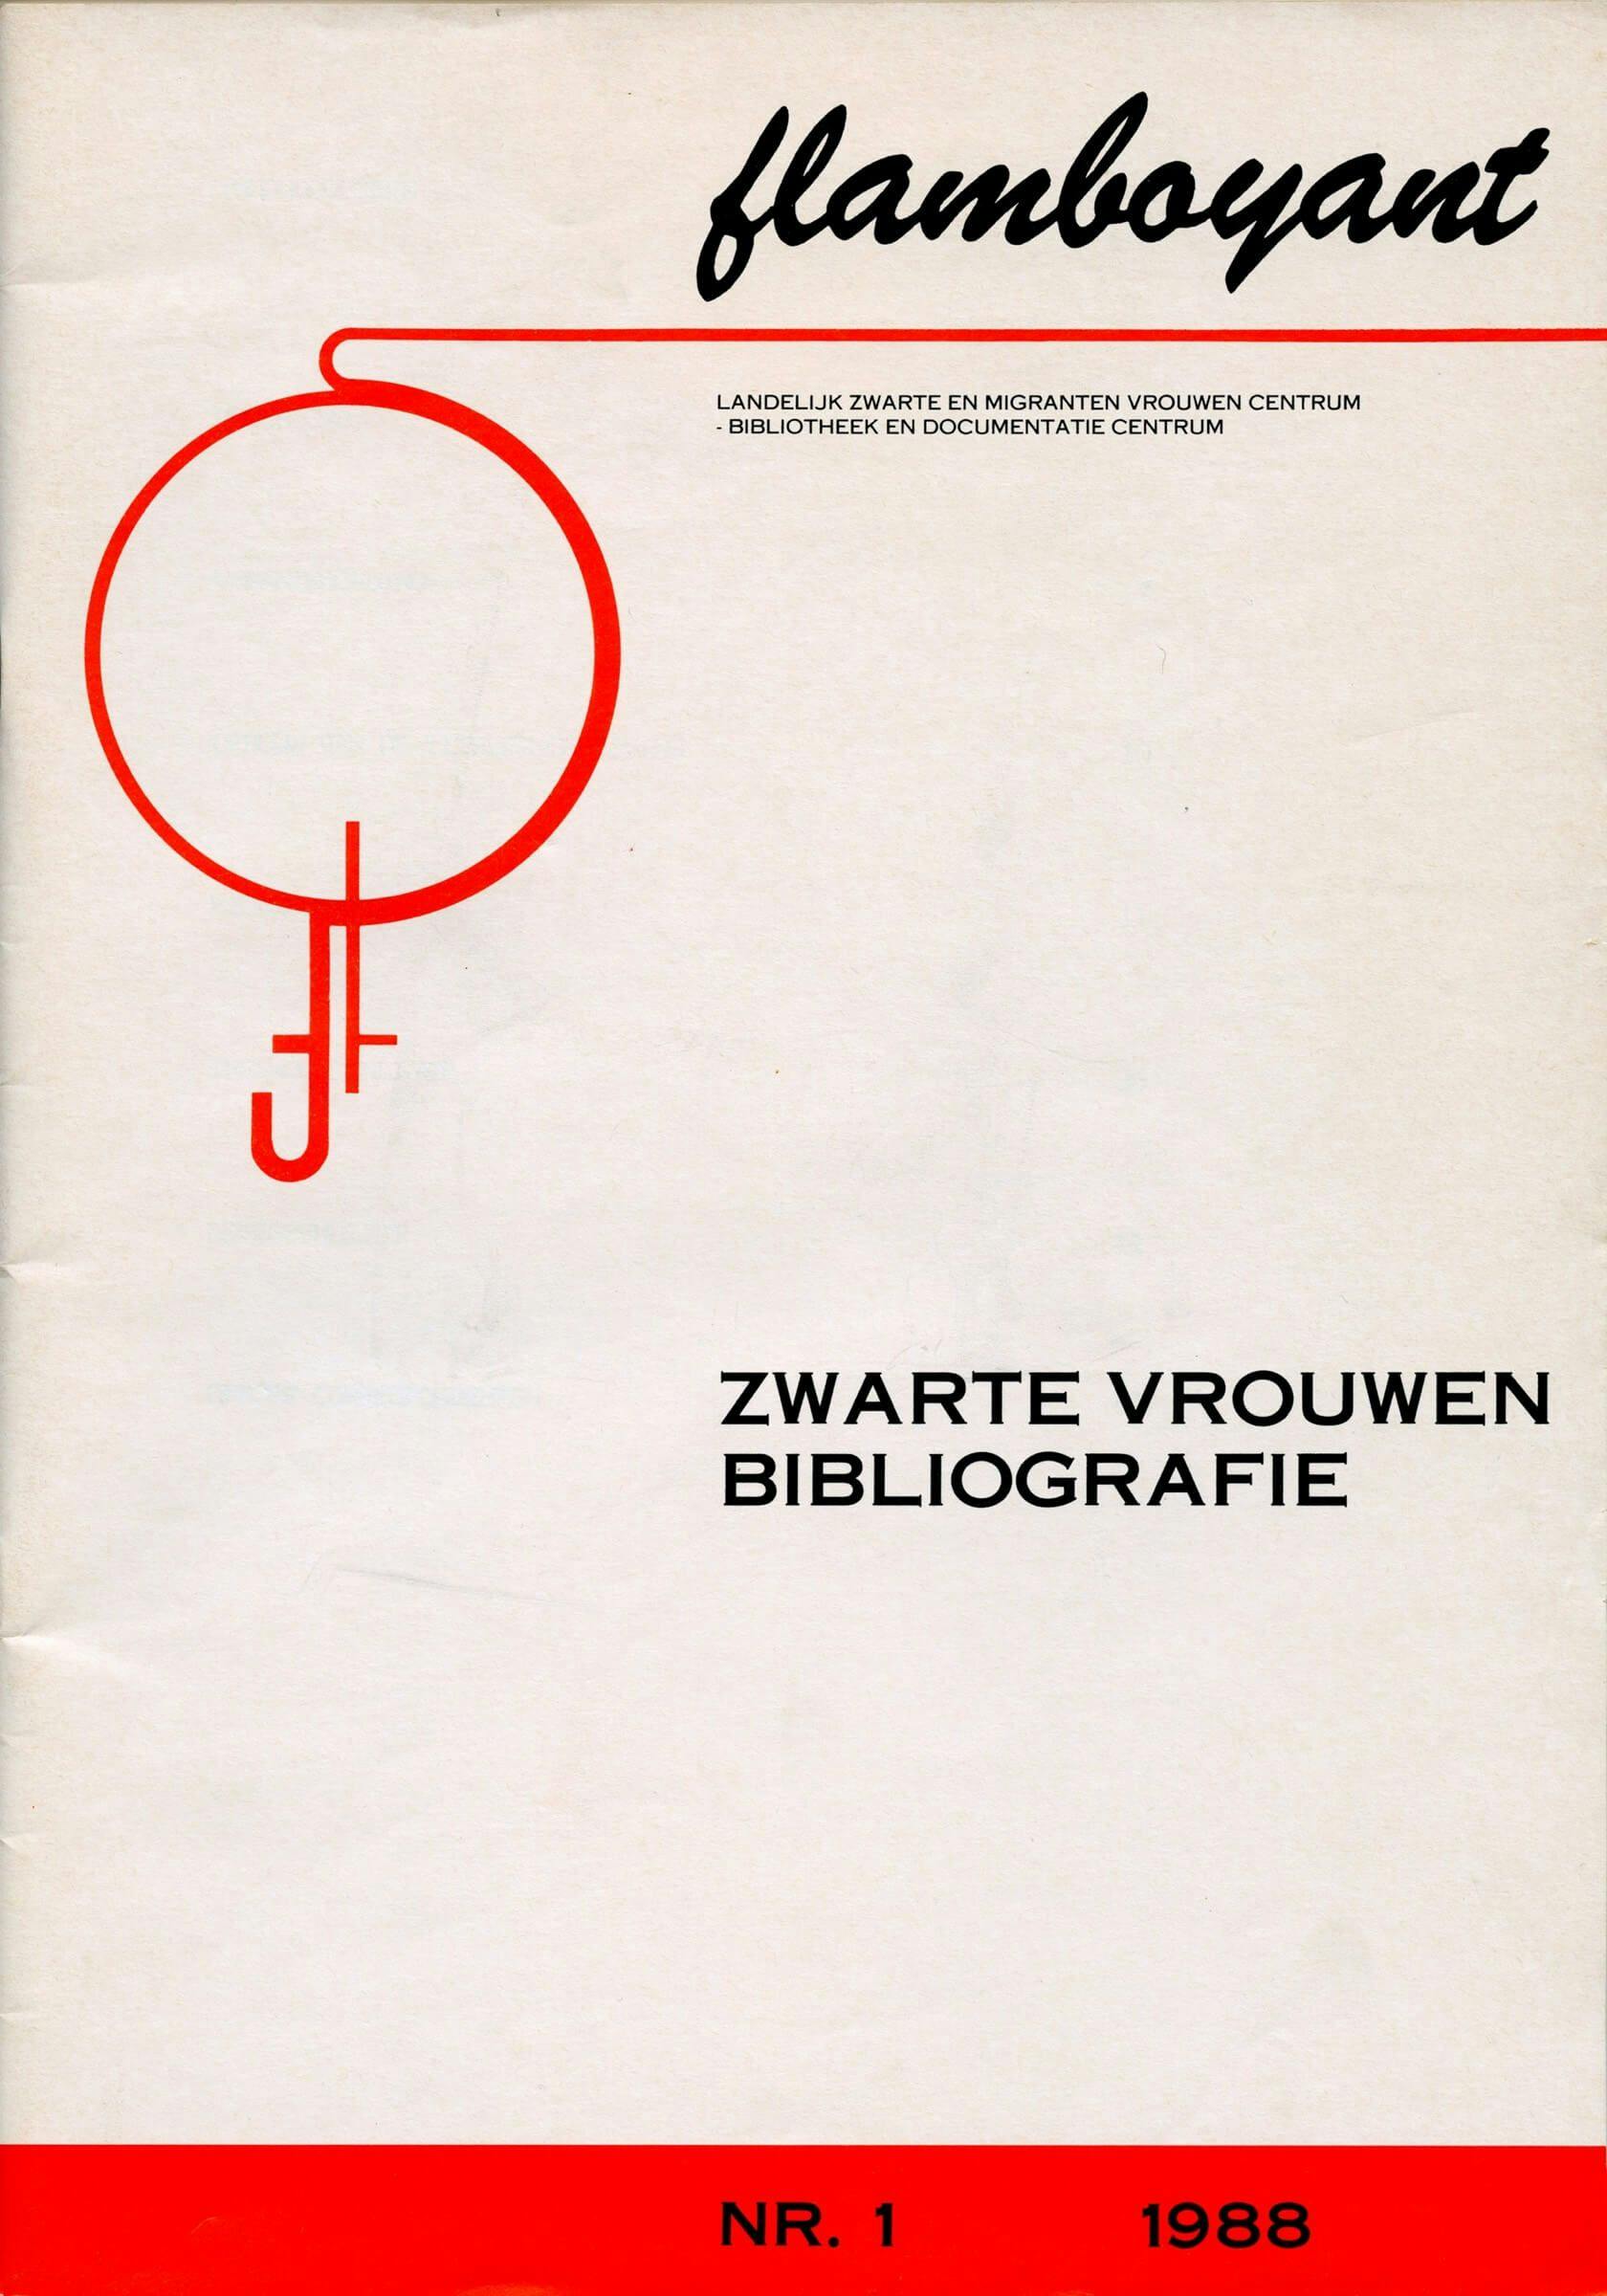 Cover “Zwarte vrouwen bibliografie” [Black Women’s Bibliography], published by Flamboyant [National Black and Migrant Women’s Centre – Library and Documentation Centre], no. 1, 1988. Source: Collection IAV-Atria 